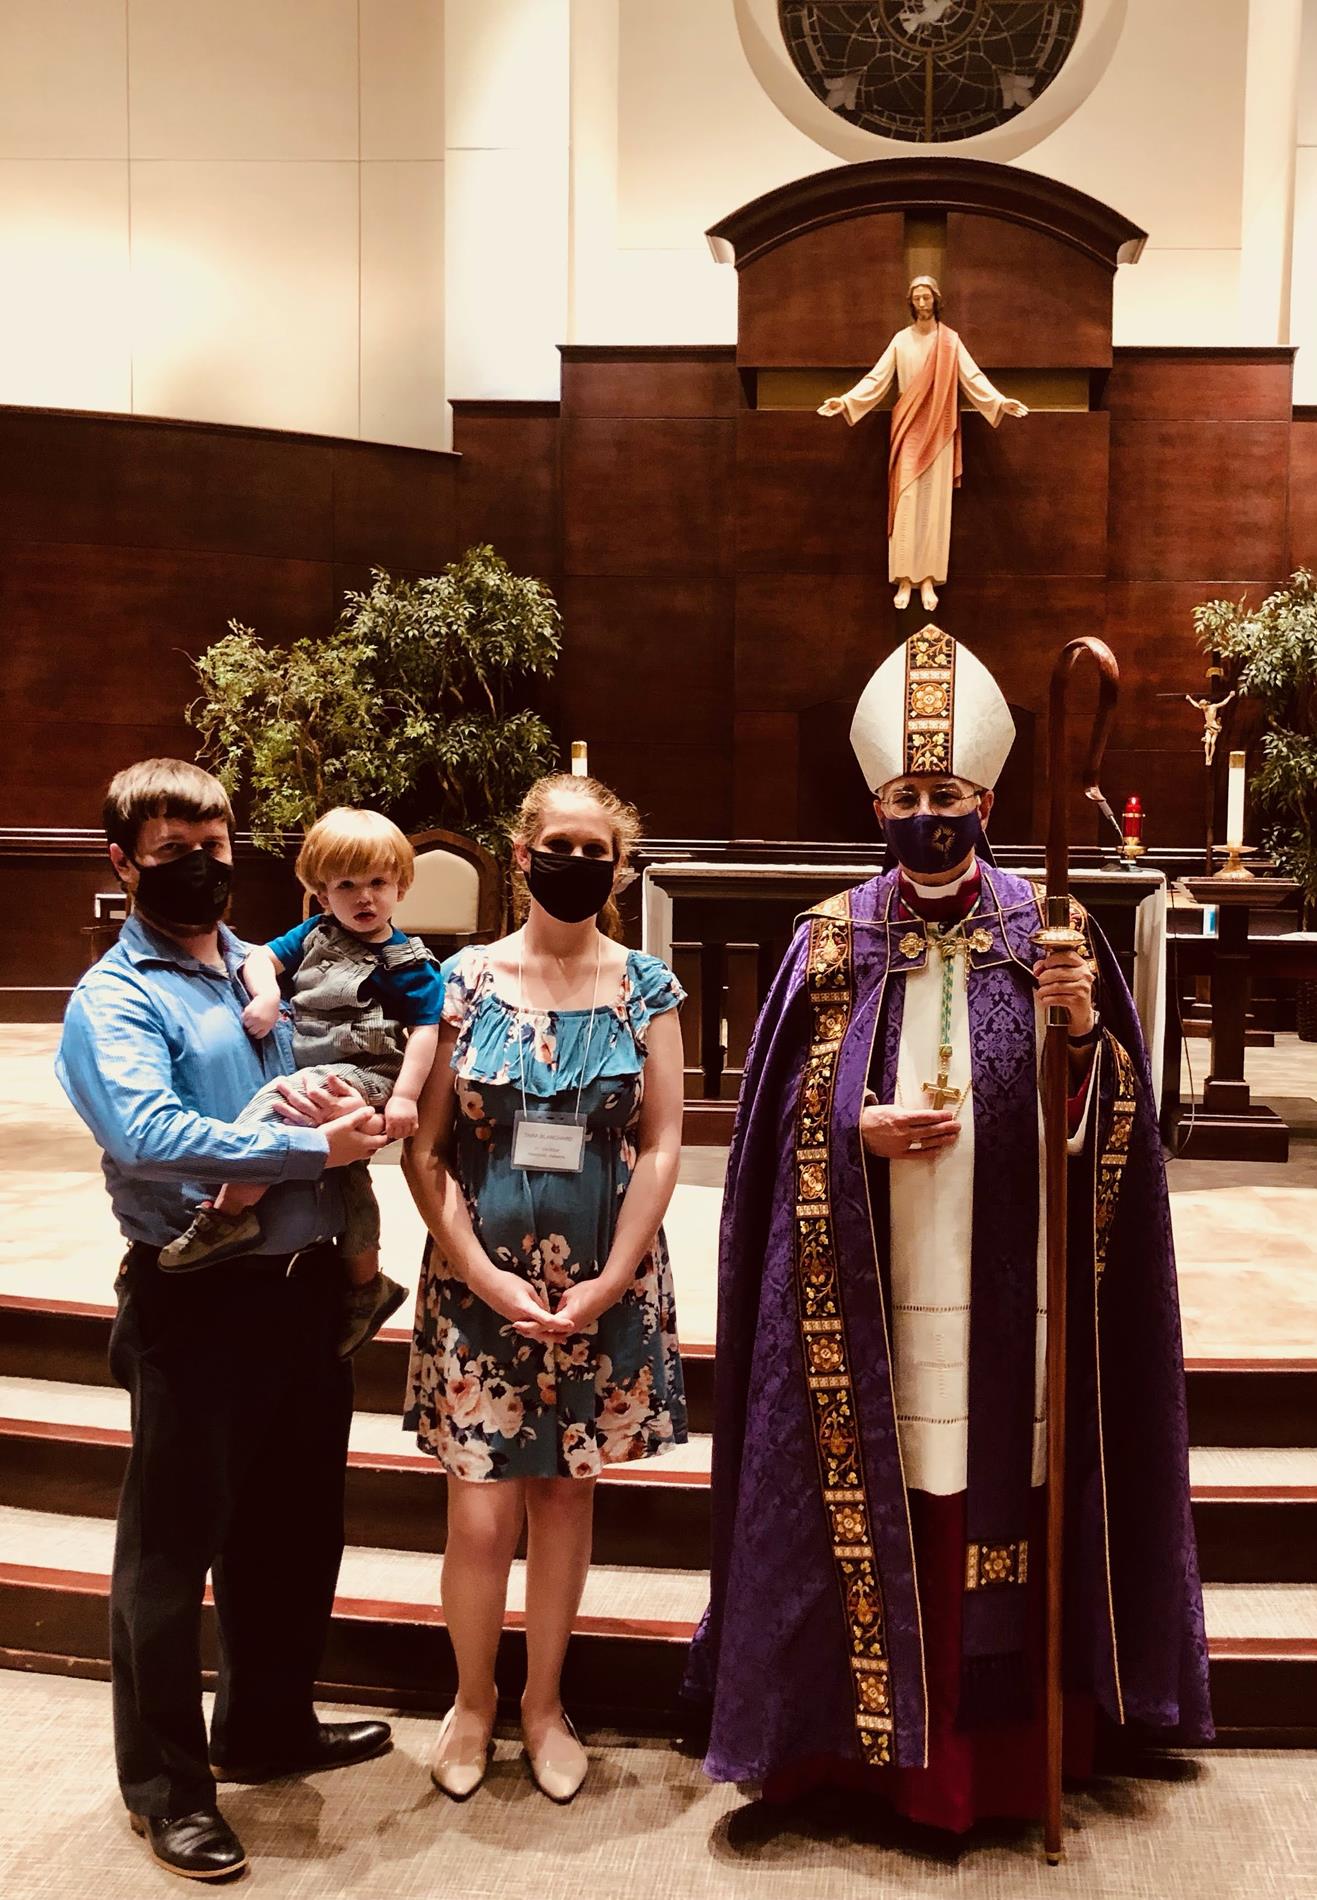 Celebrating our candidates "Call to Continuing Conversion" with West Deanery parishes at Prince of Peace Catholic Church. Pictured is Jeff and Tara Blanchard and family with Bishop Raica.